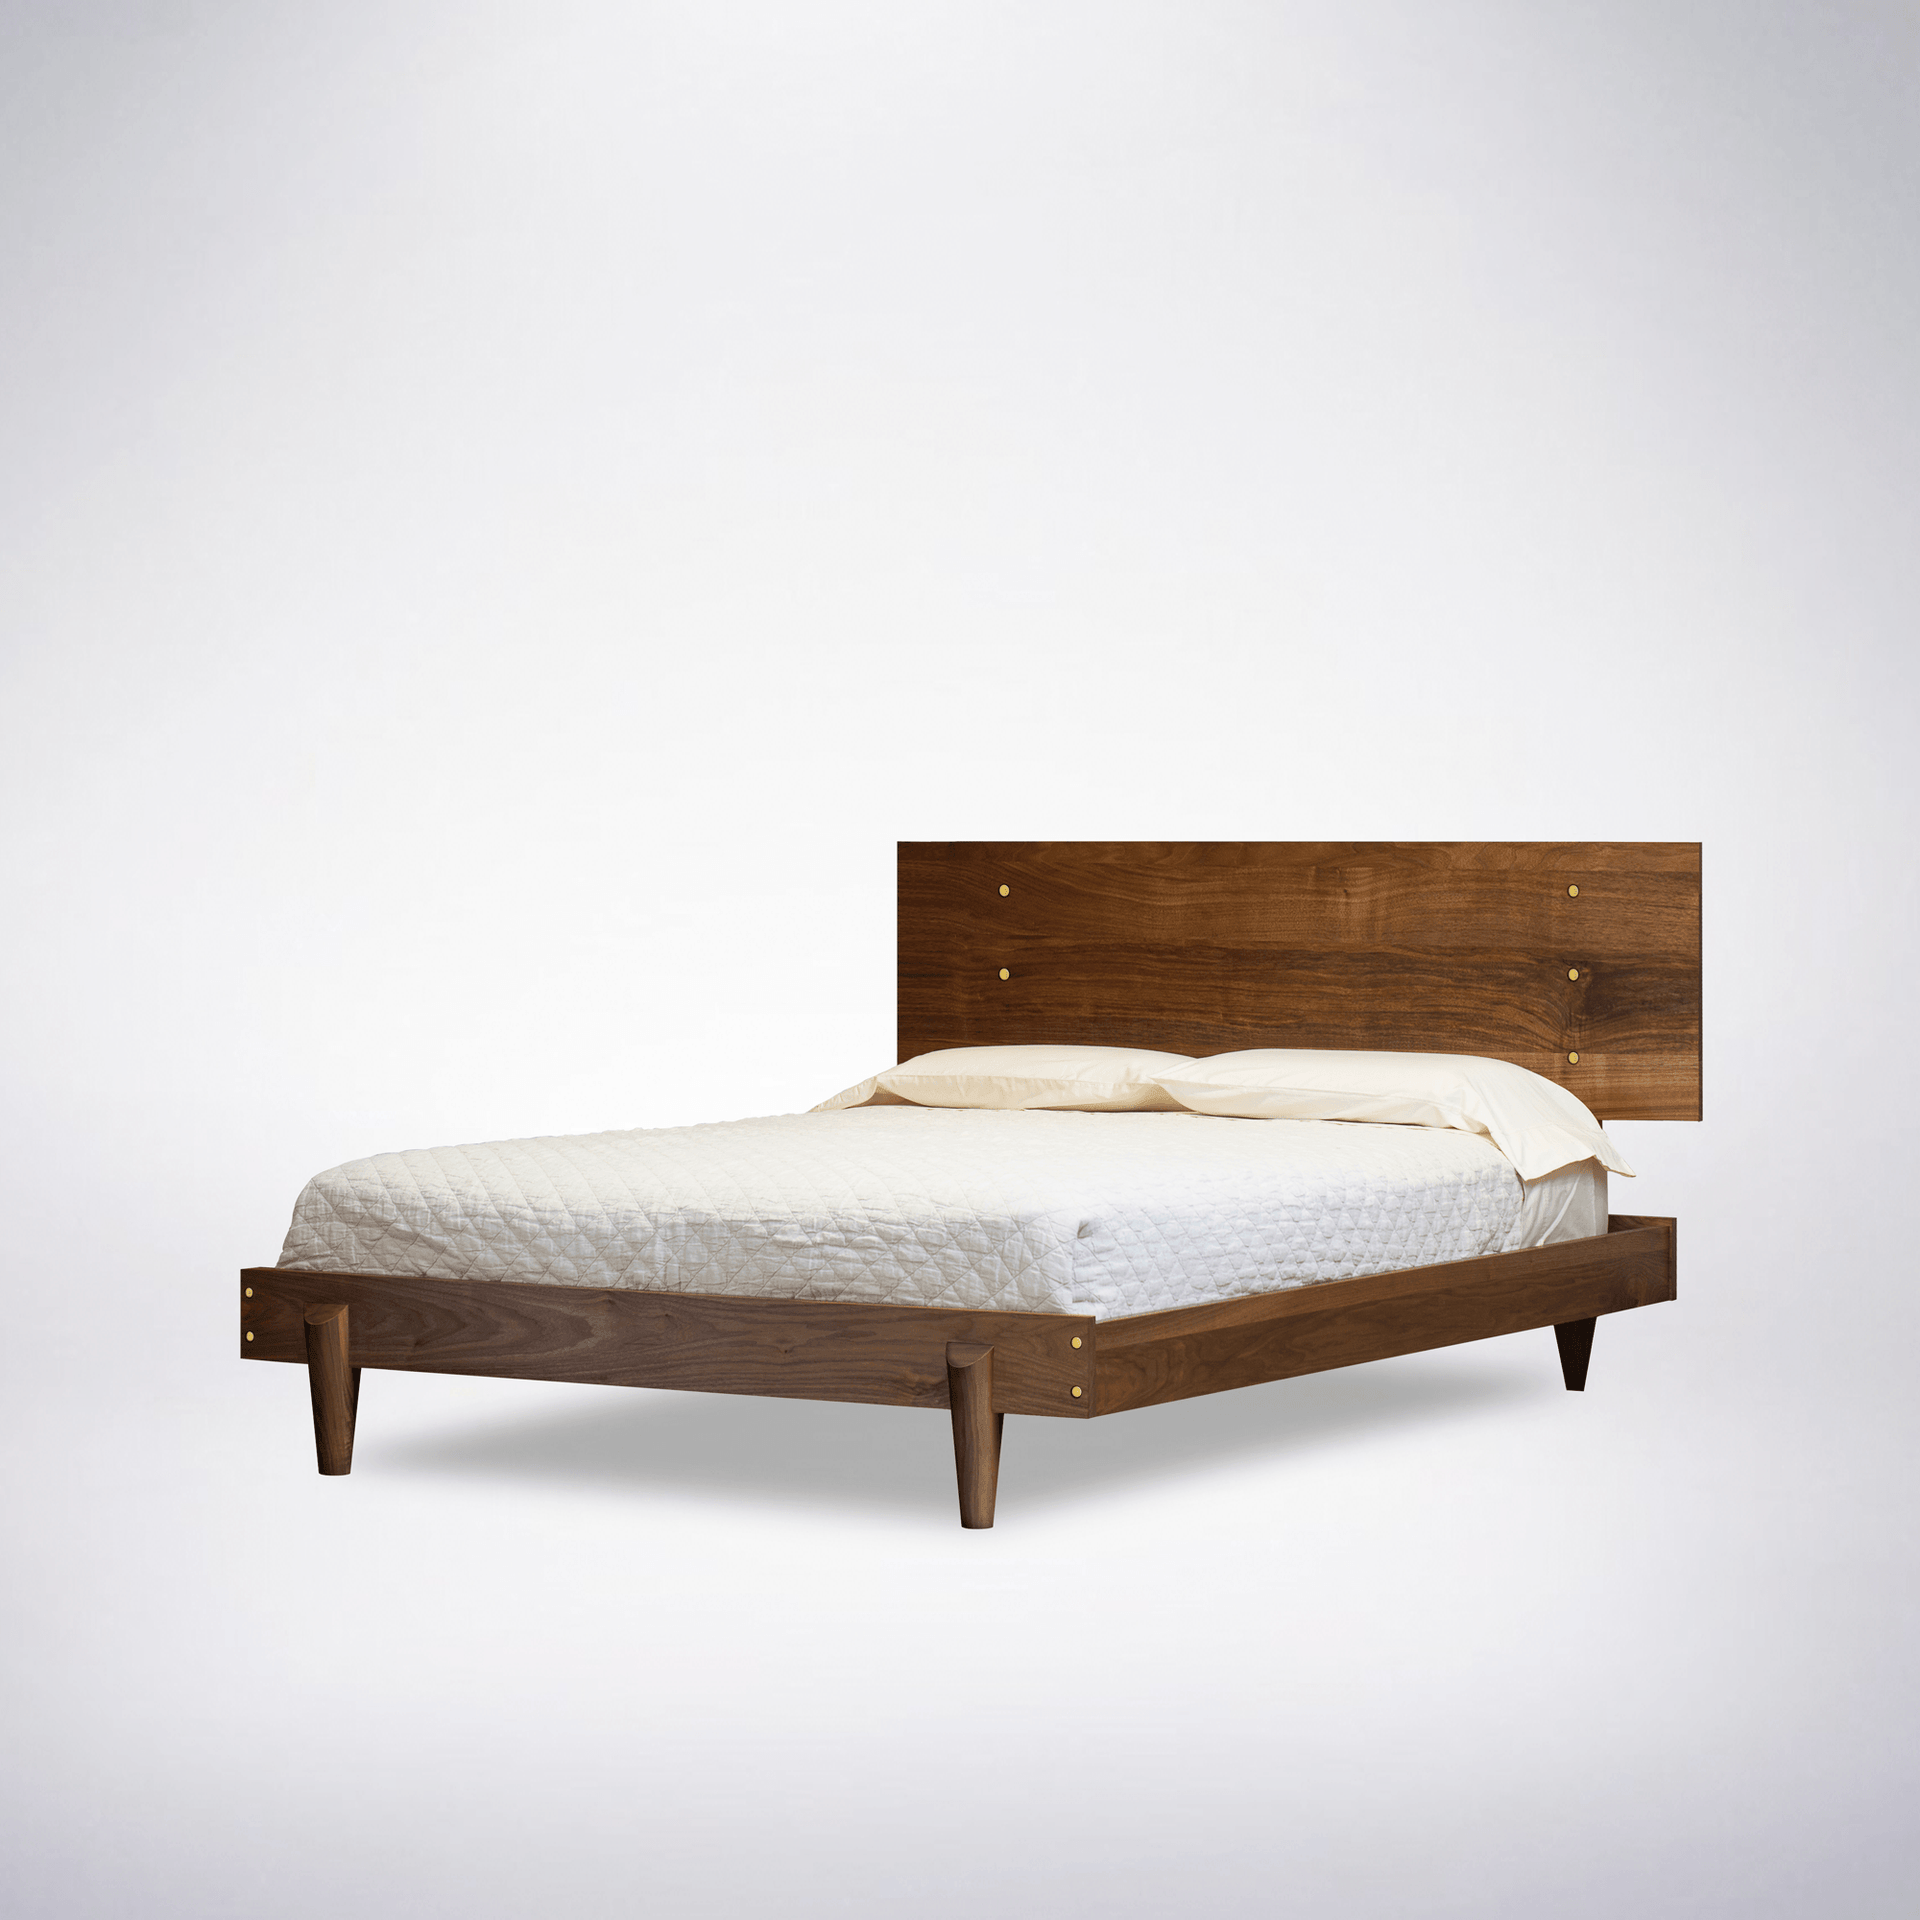 Solid wood platform bed made in USA